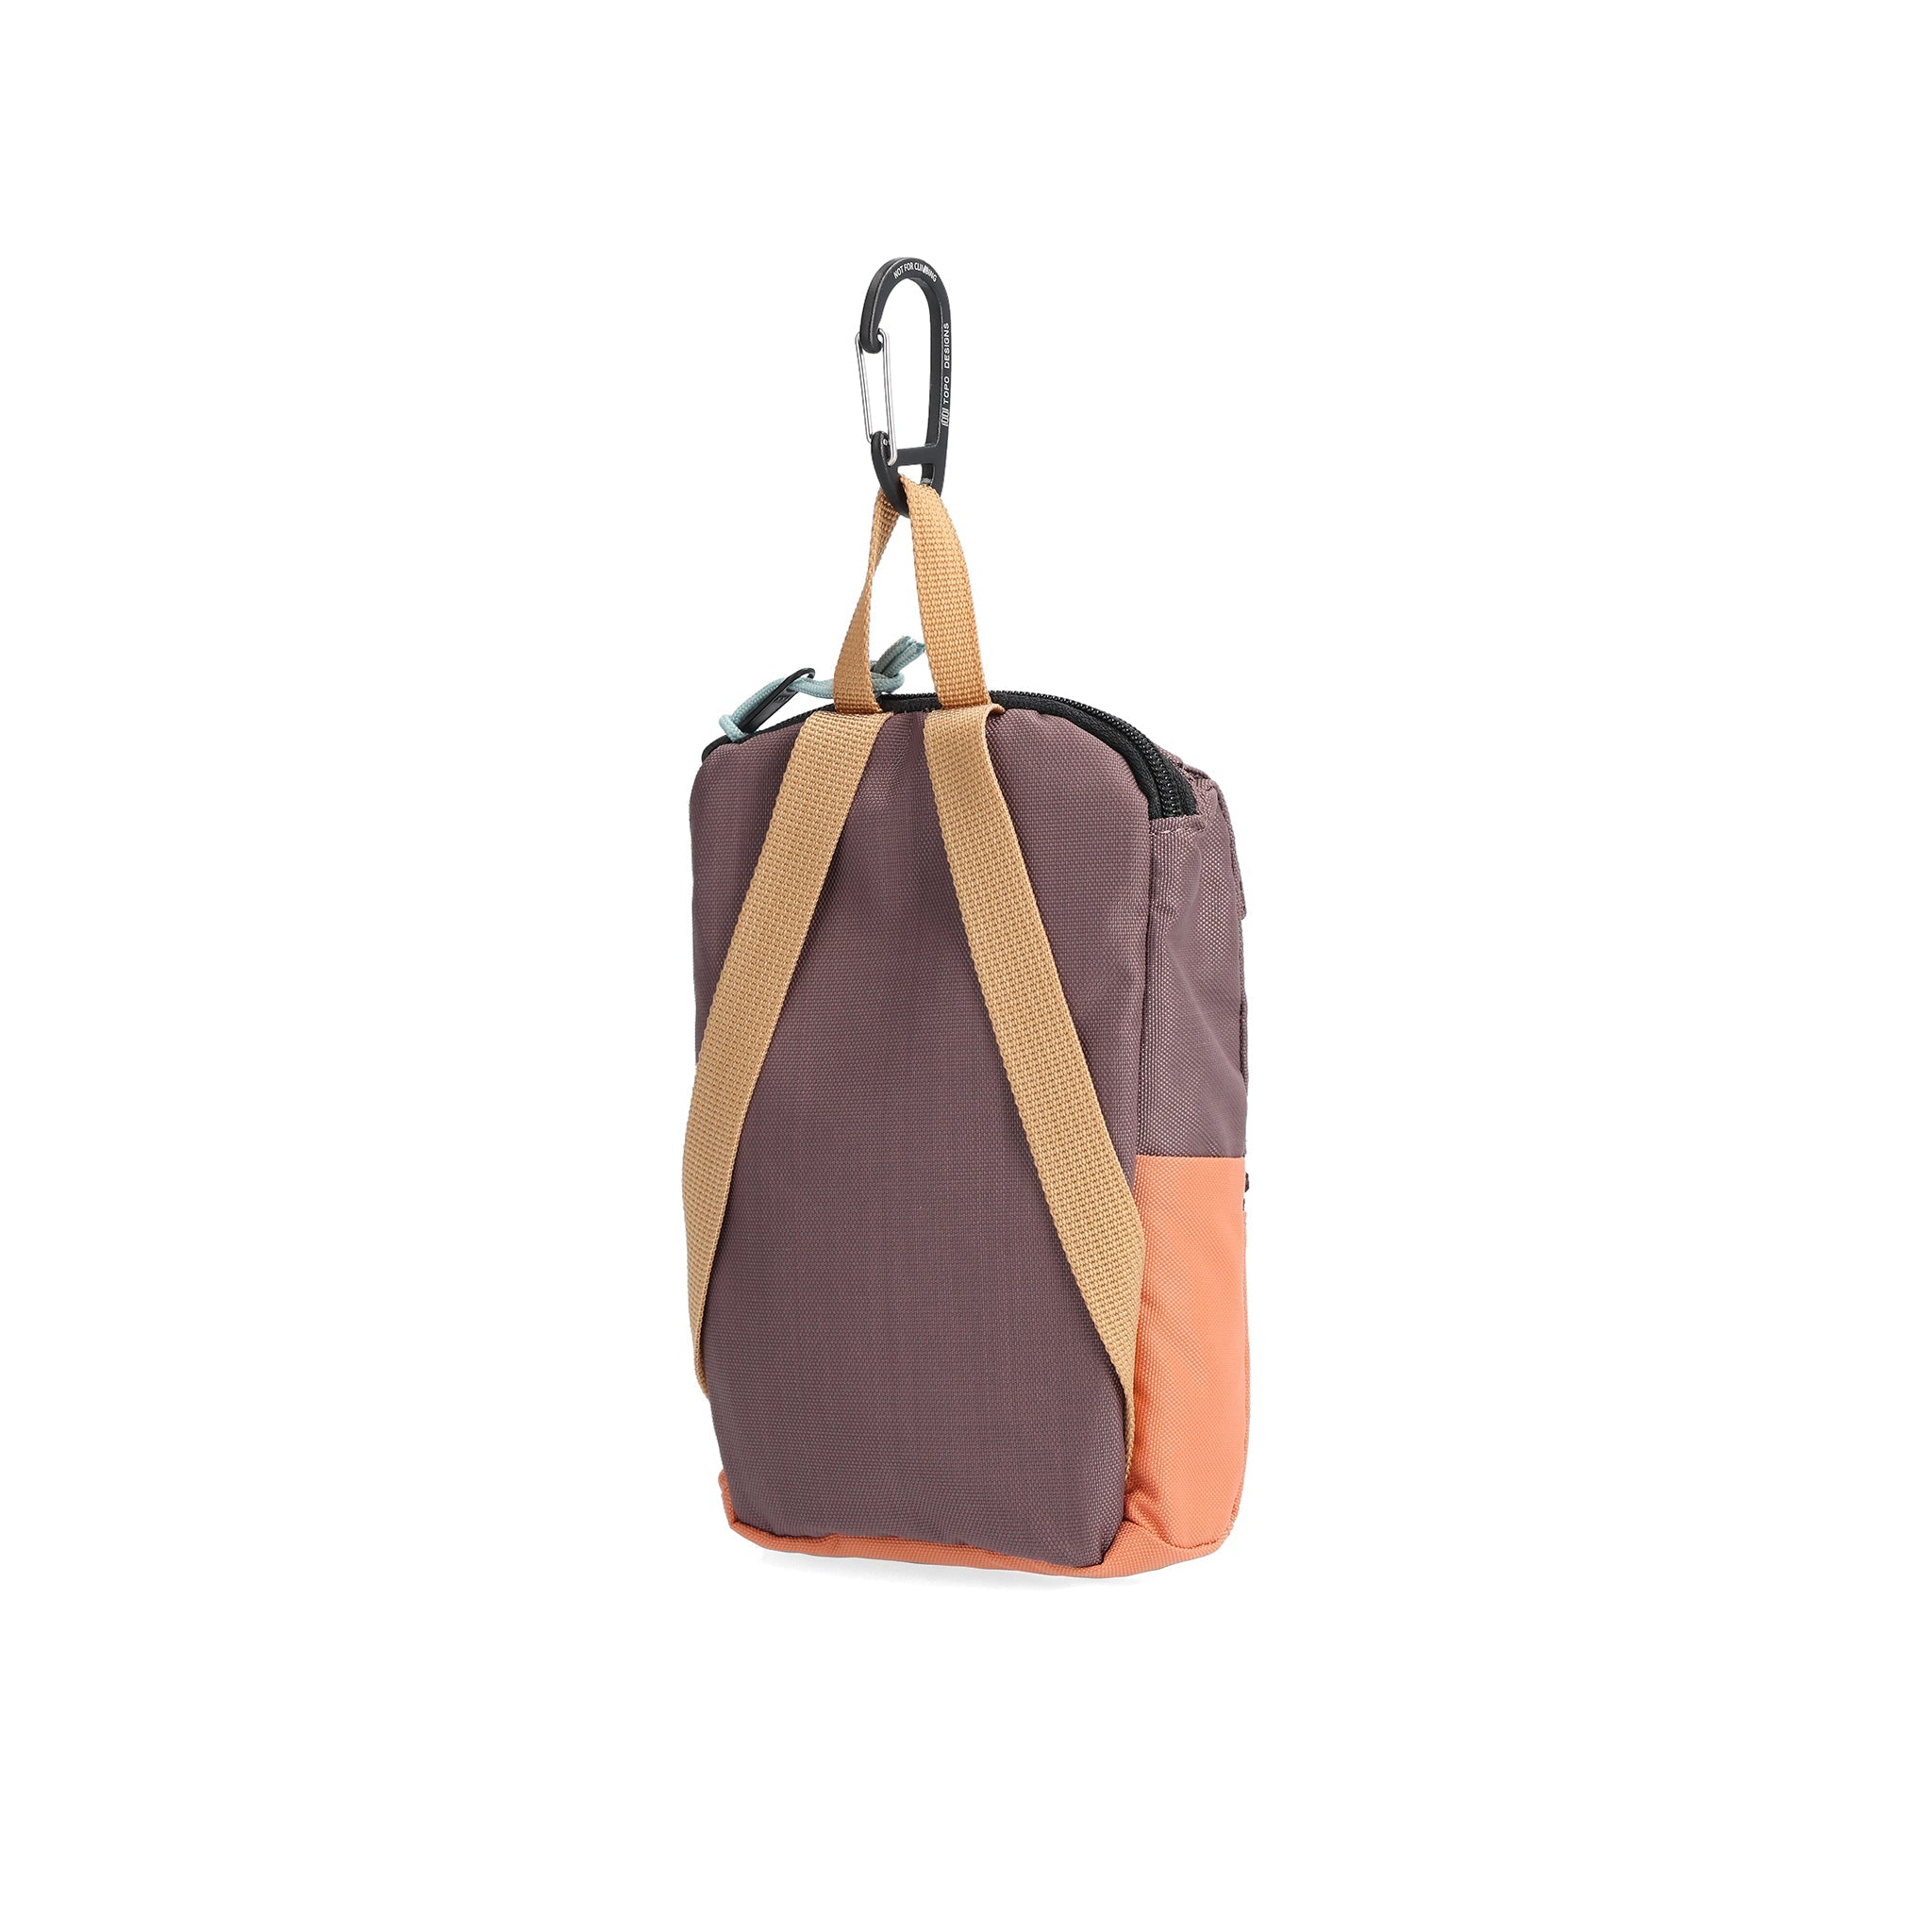 Back View of Topo Designs Rover Pack Micro in "Coral / Peppercorn"